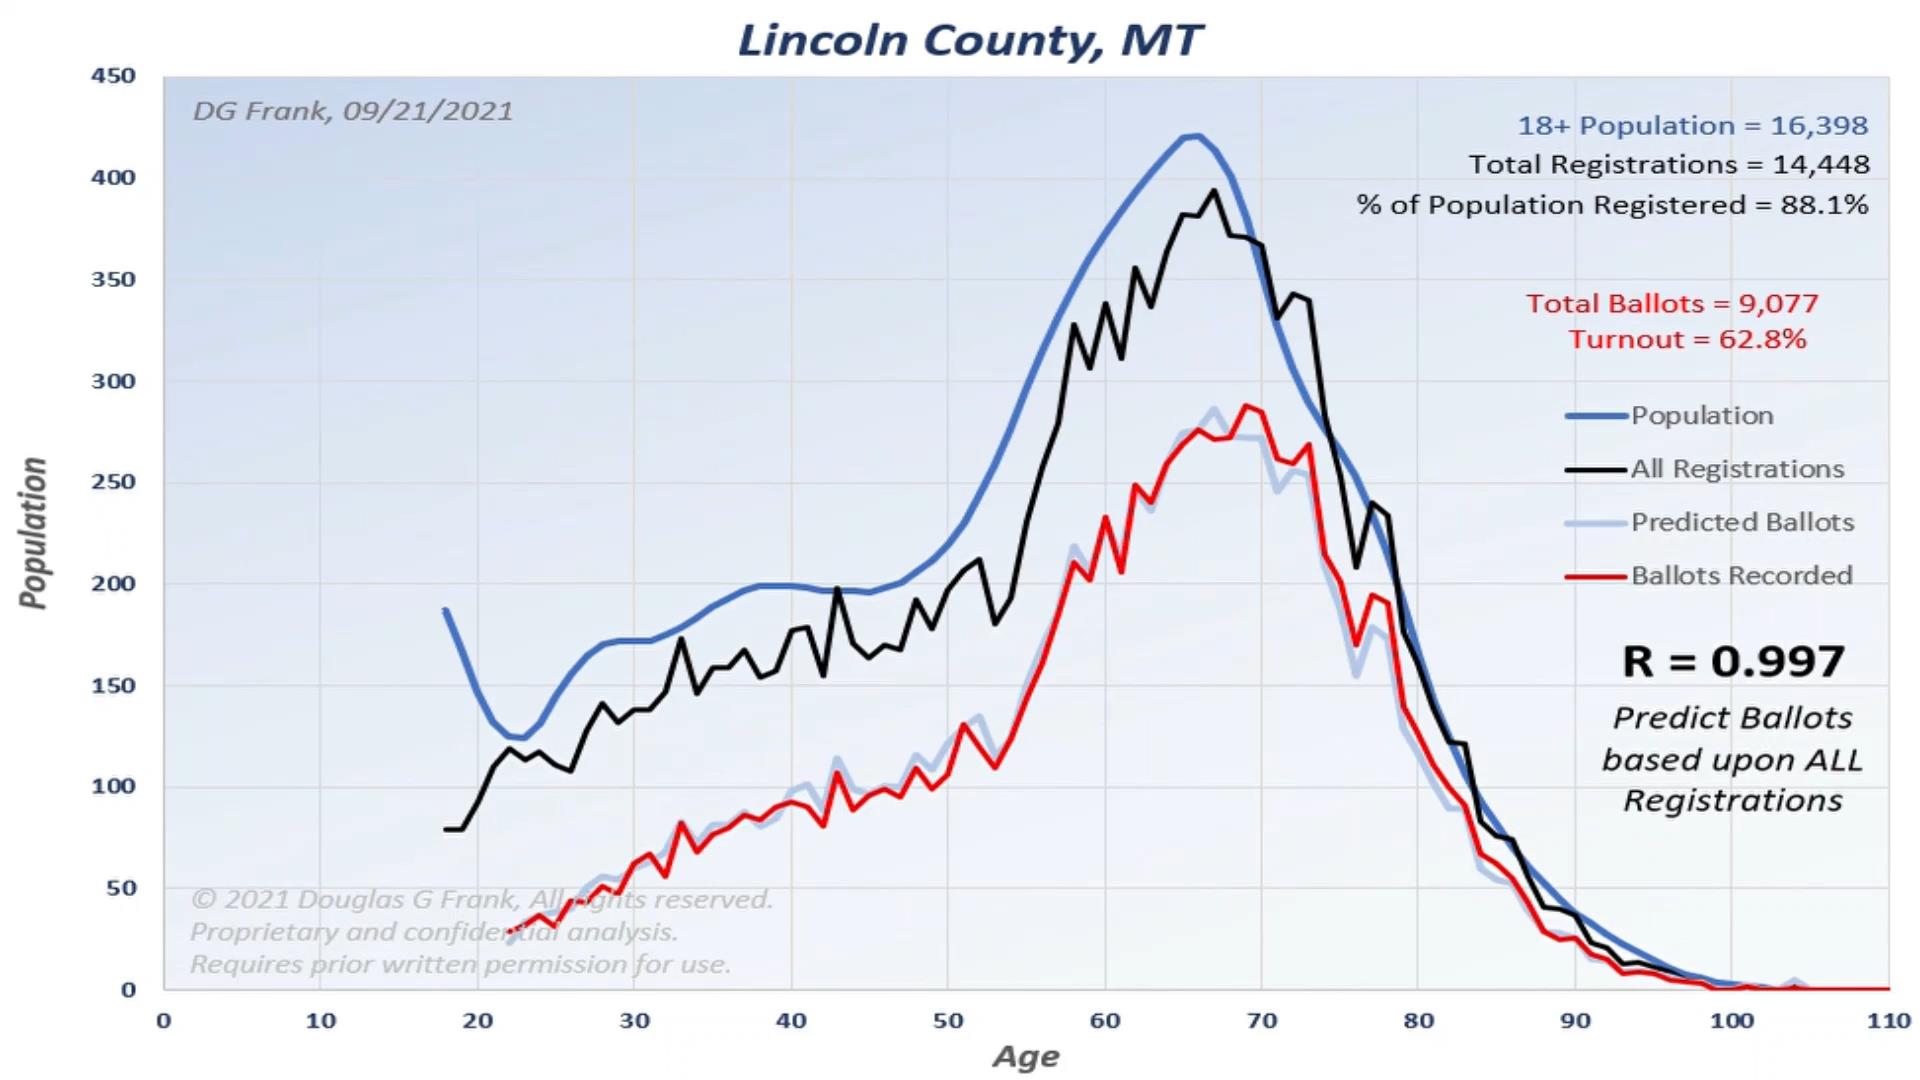 Lincoln County 2020 Election Analysis Chart by Dr. Doug Frank